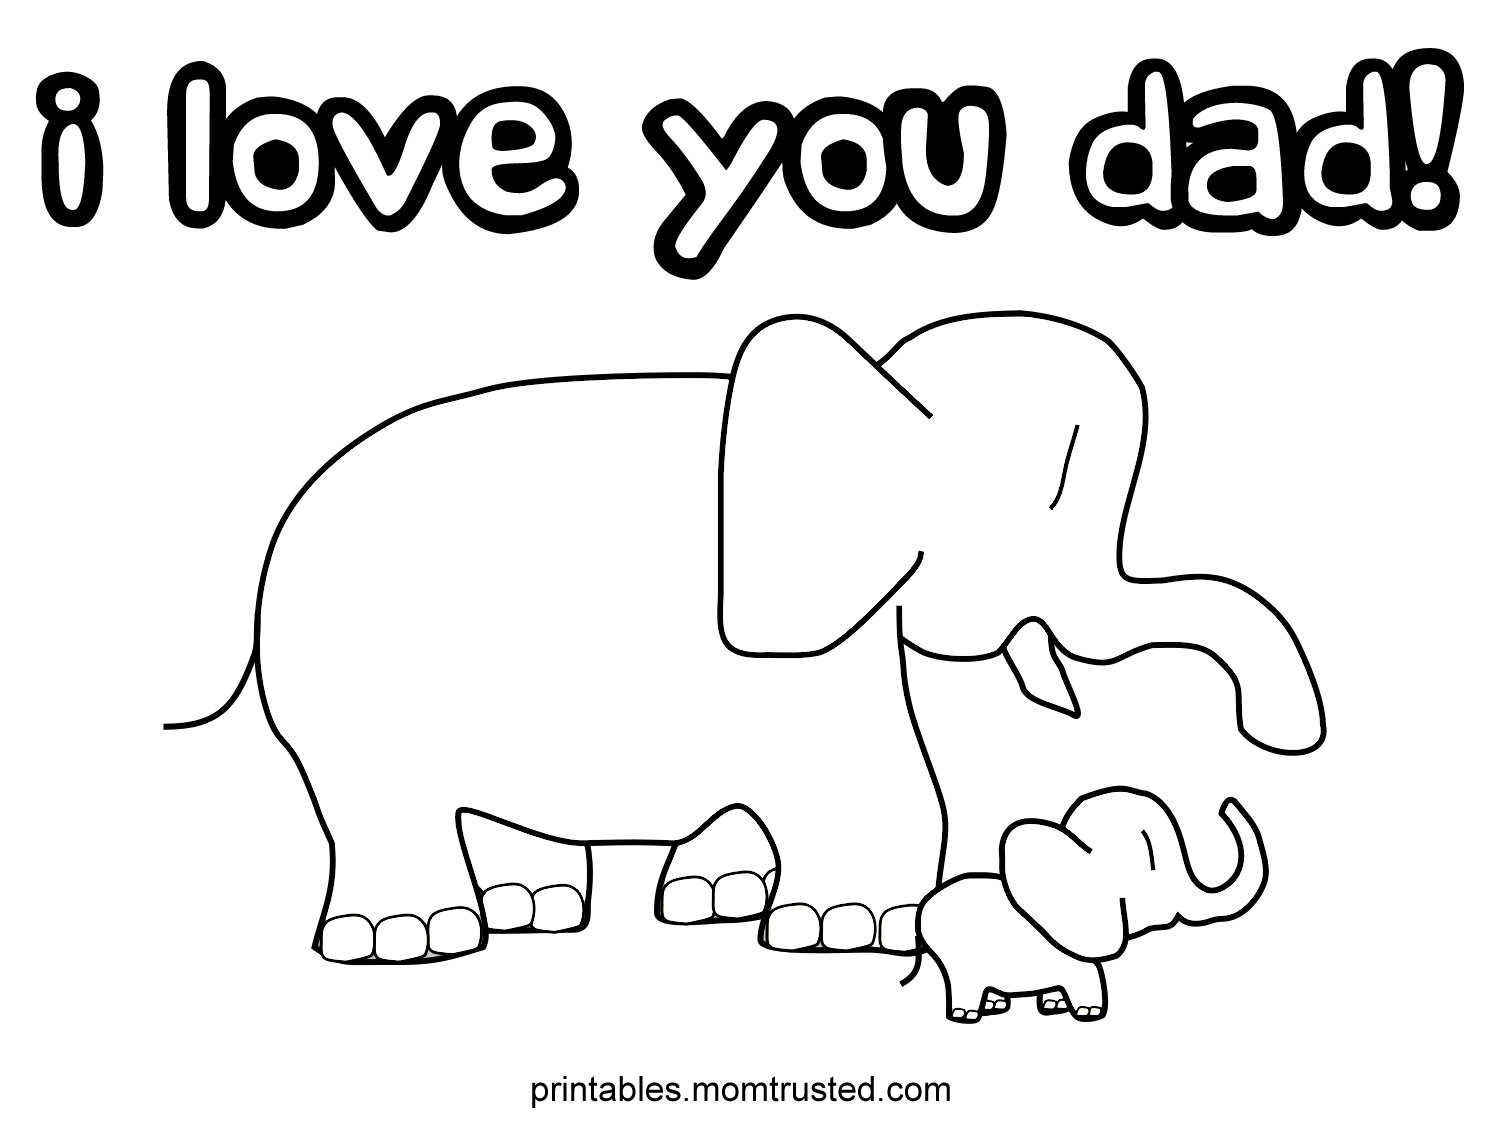 I Love You Dad Coloring Page Elephants